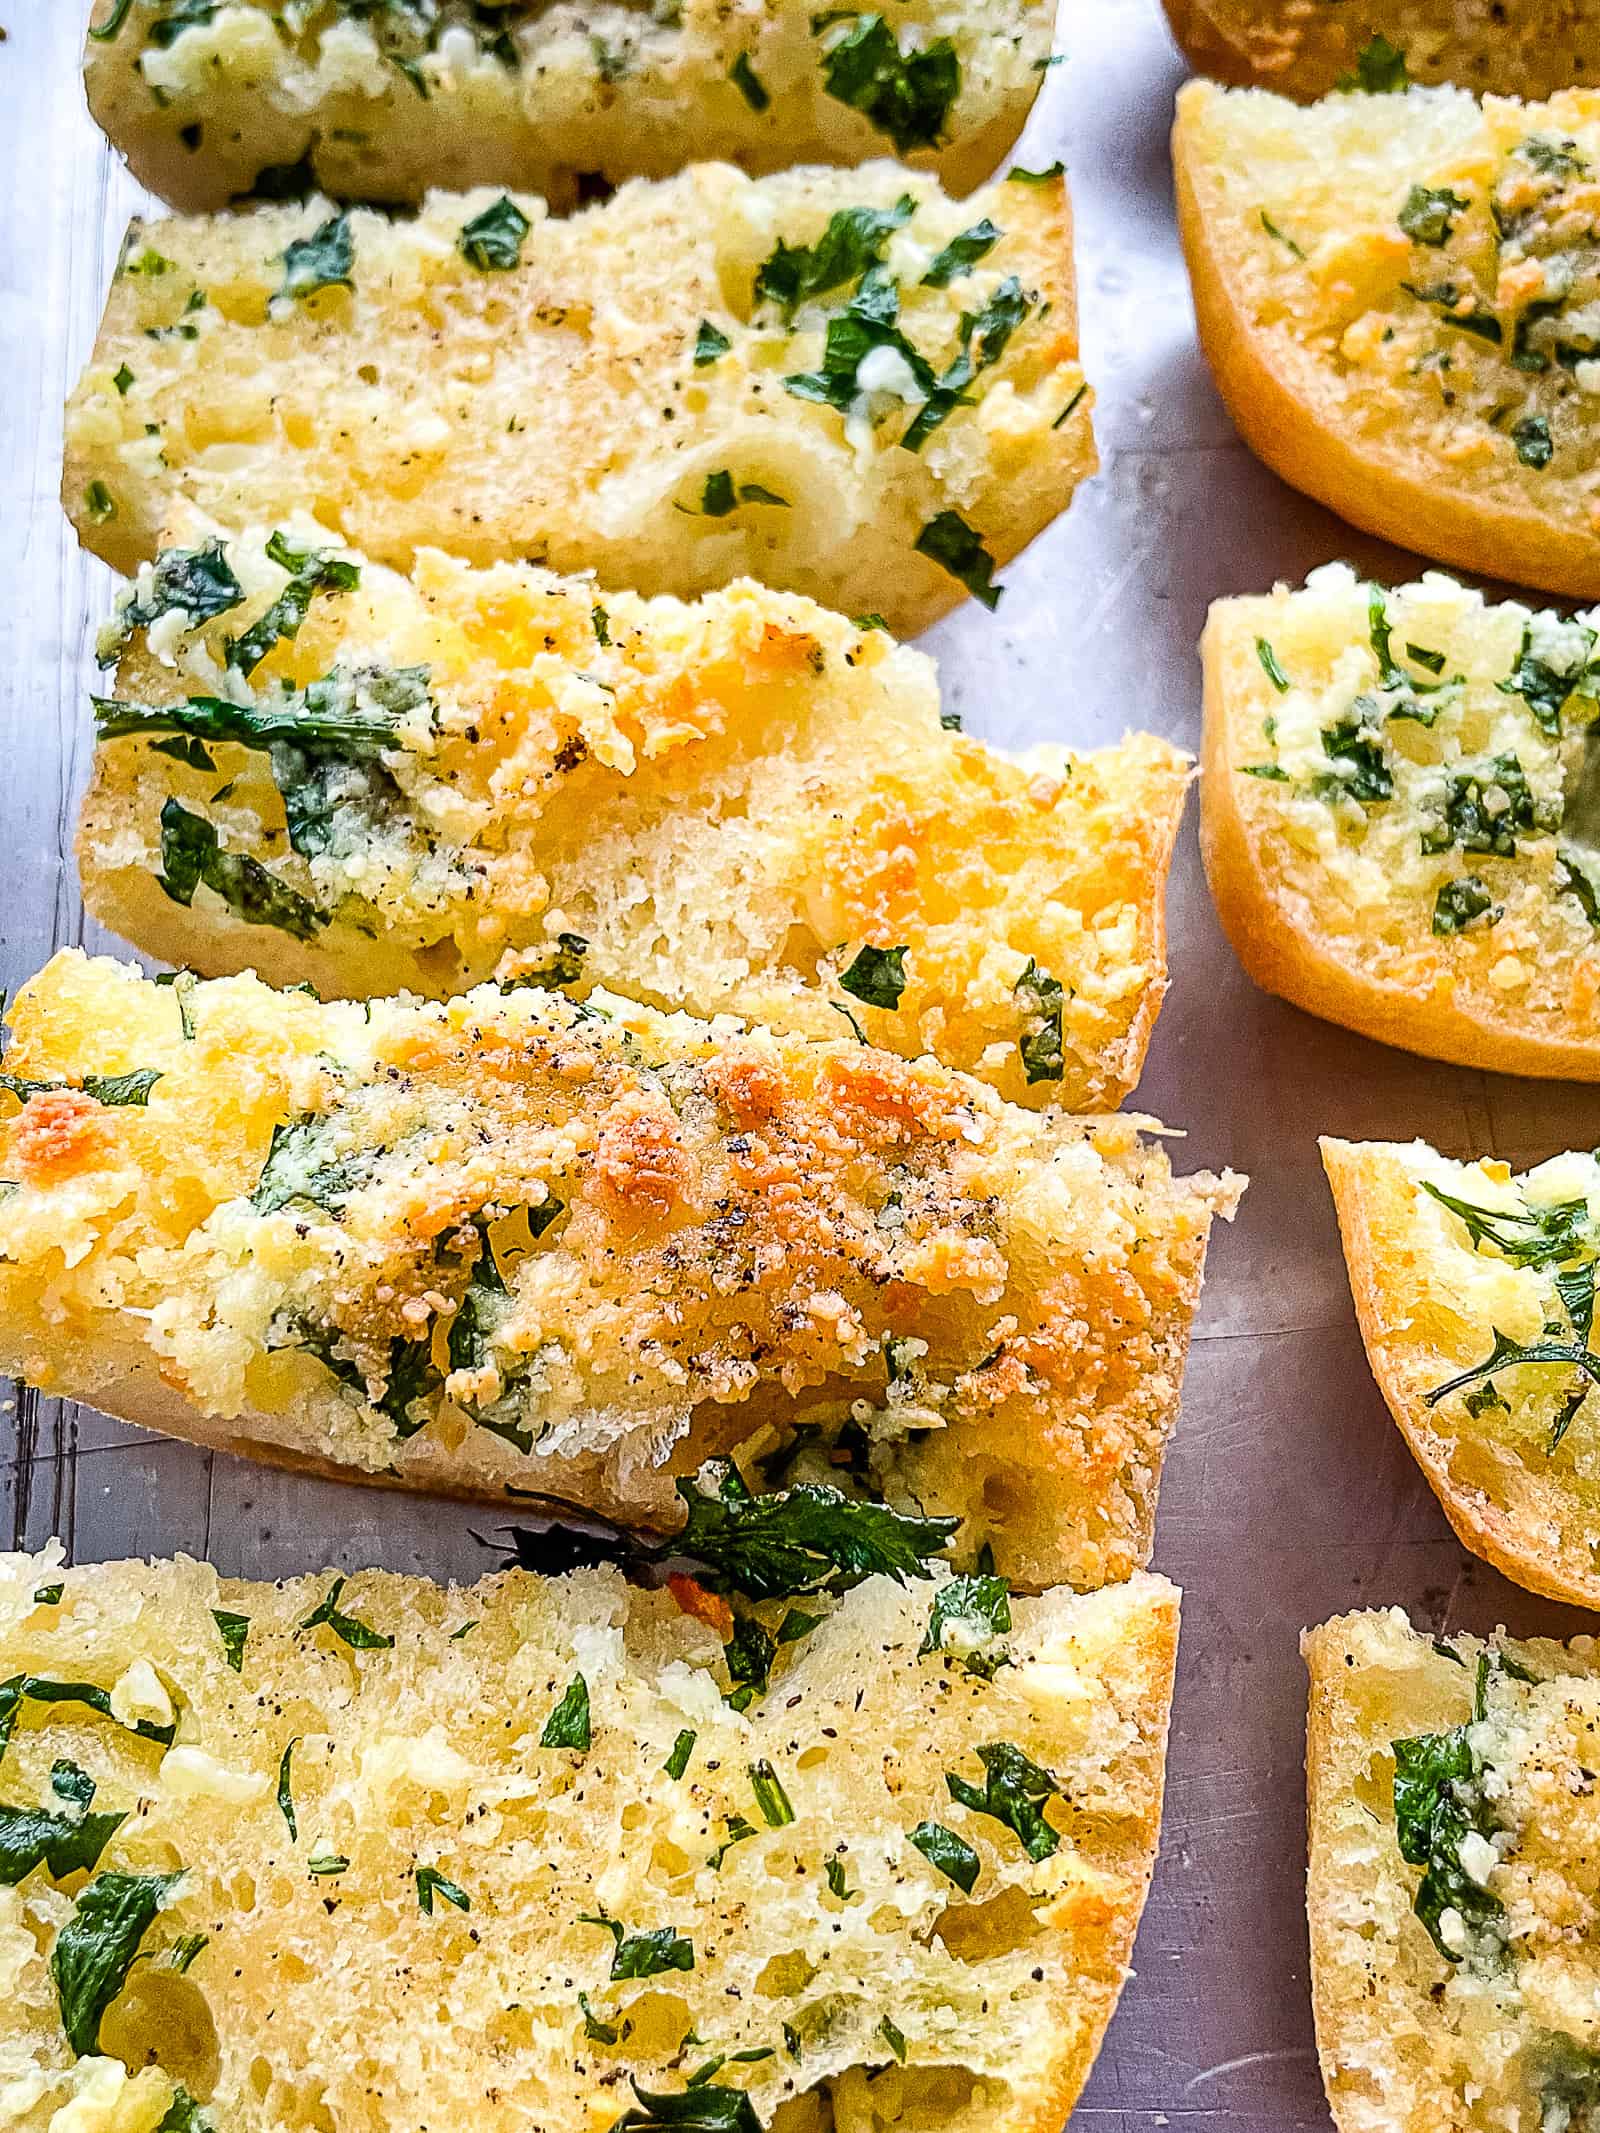 Slices of baked gluten-free garlic bread on a sheet pan.